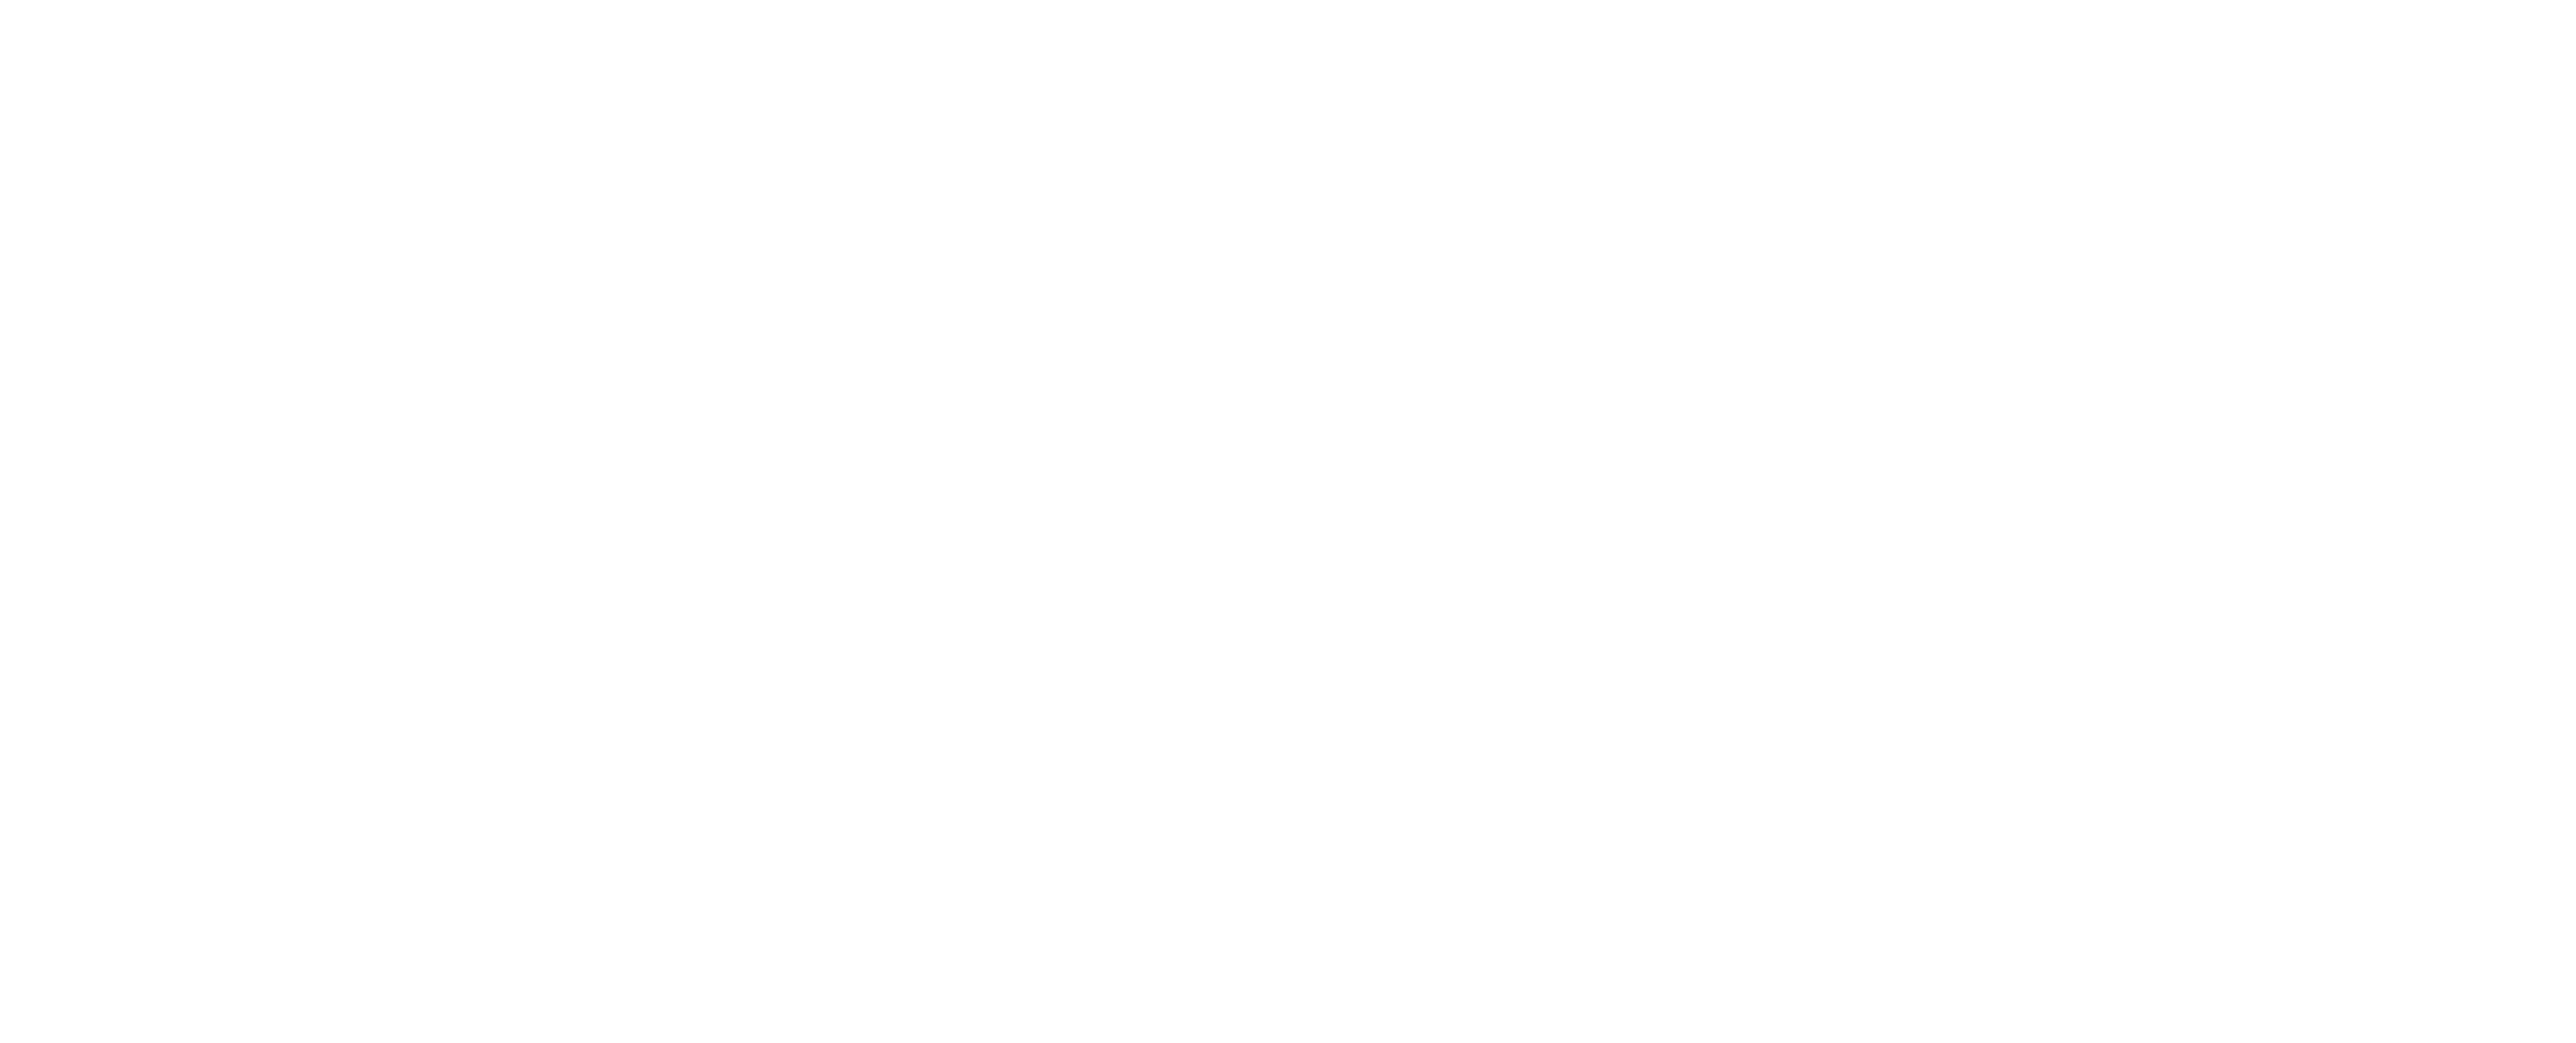 Inclin - Sustainable businesses